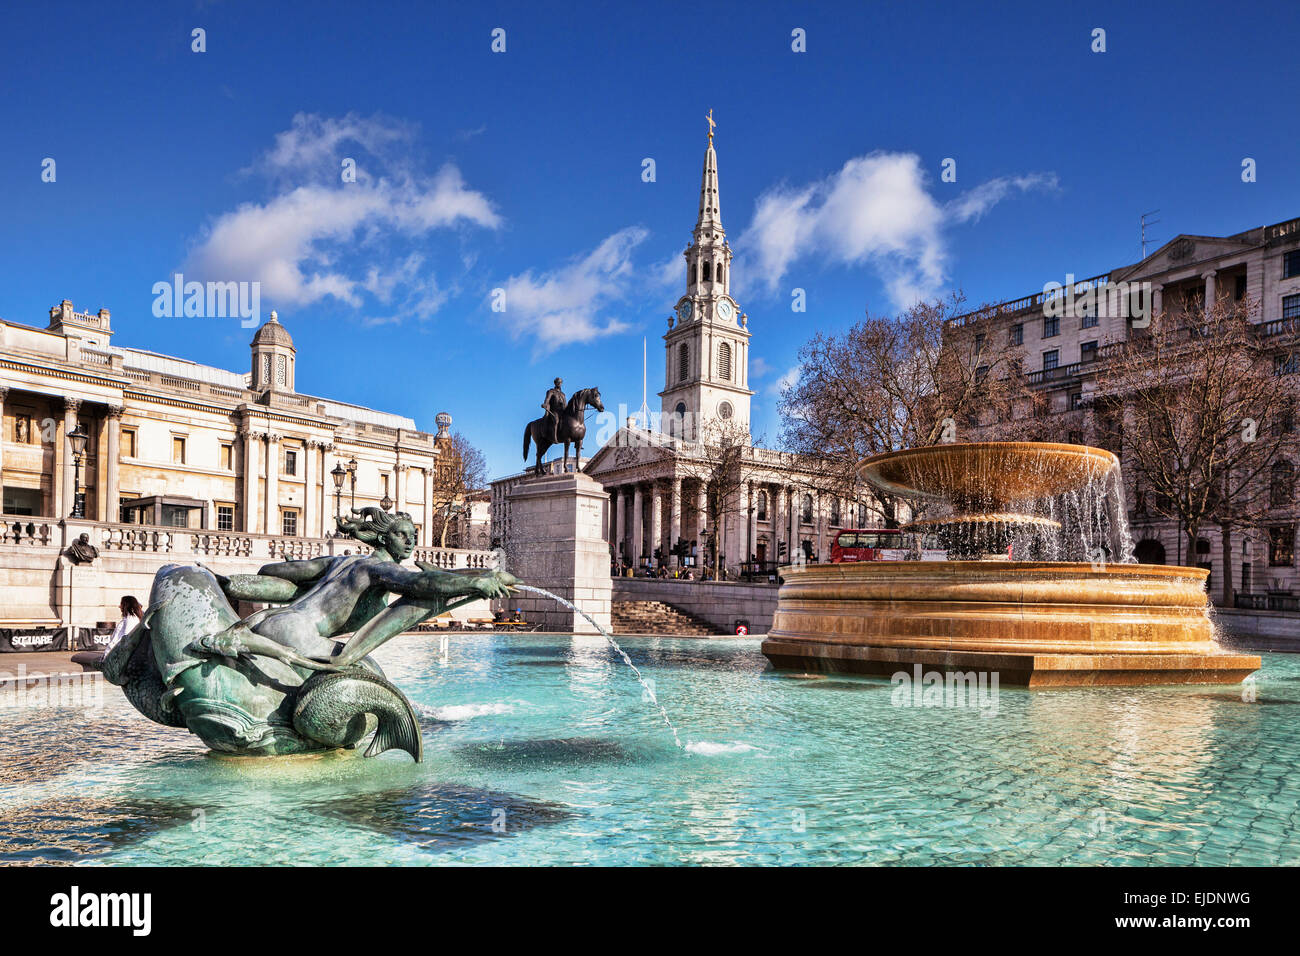 Trafalgar Square, London, with the Church of St Martin in the Fields, and the statue of George IV. Stock Photo